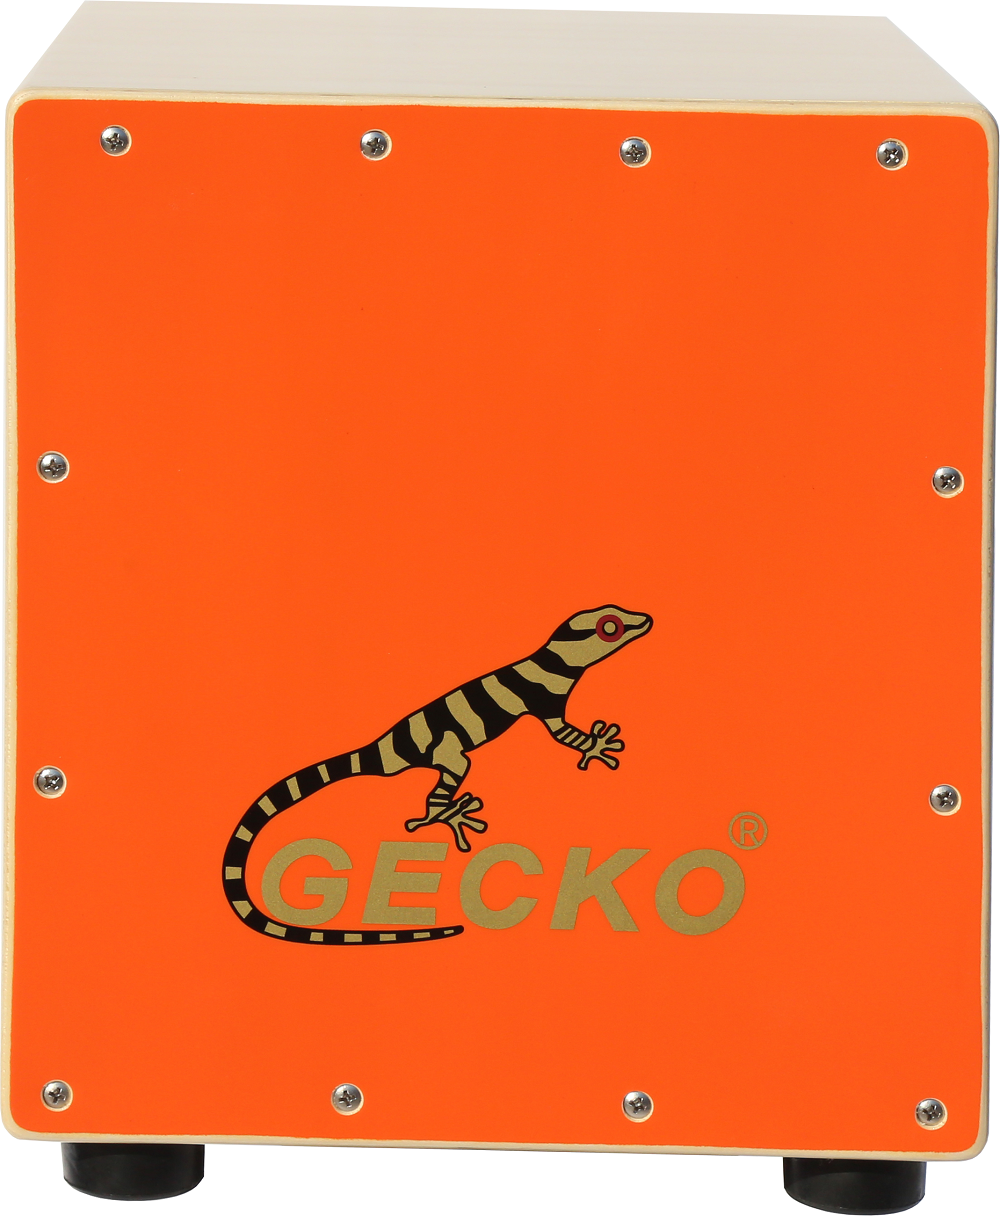 Hot selling Cajon Drum Musical Instruments from GECKO Factory Supplier